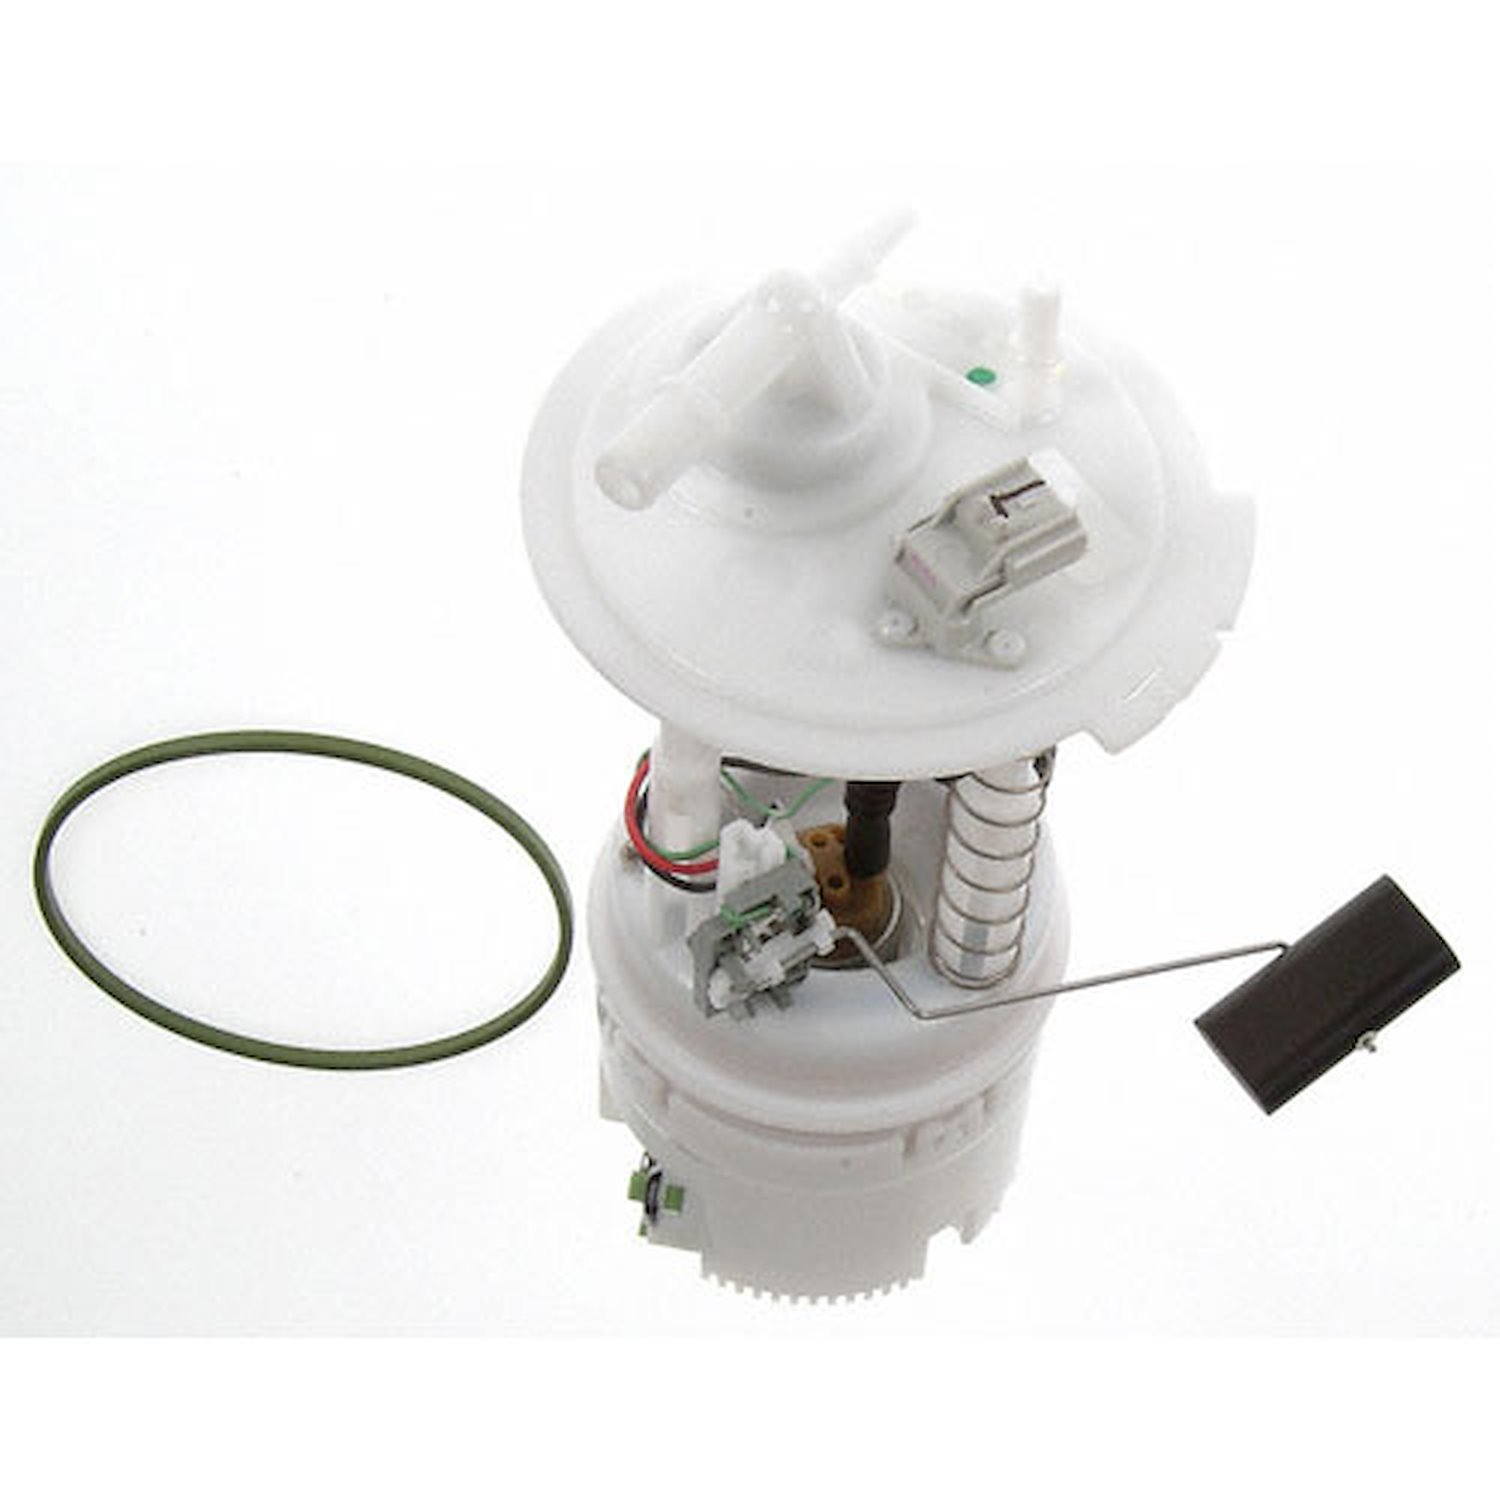 OE Chrysler/Dodge Replacement Electric Fuel Pump Module Assembly 2003-06 Chrysler Sebring 2.4L/2.7L 4 Cyl